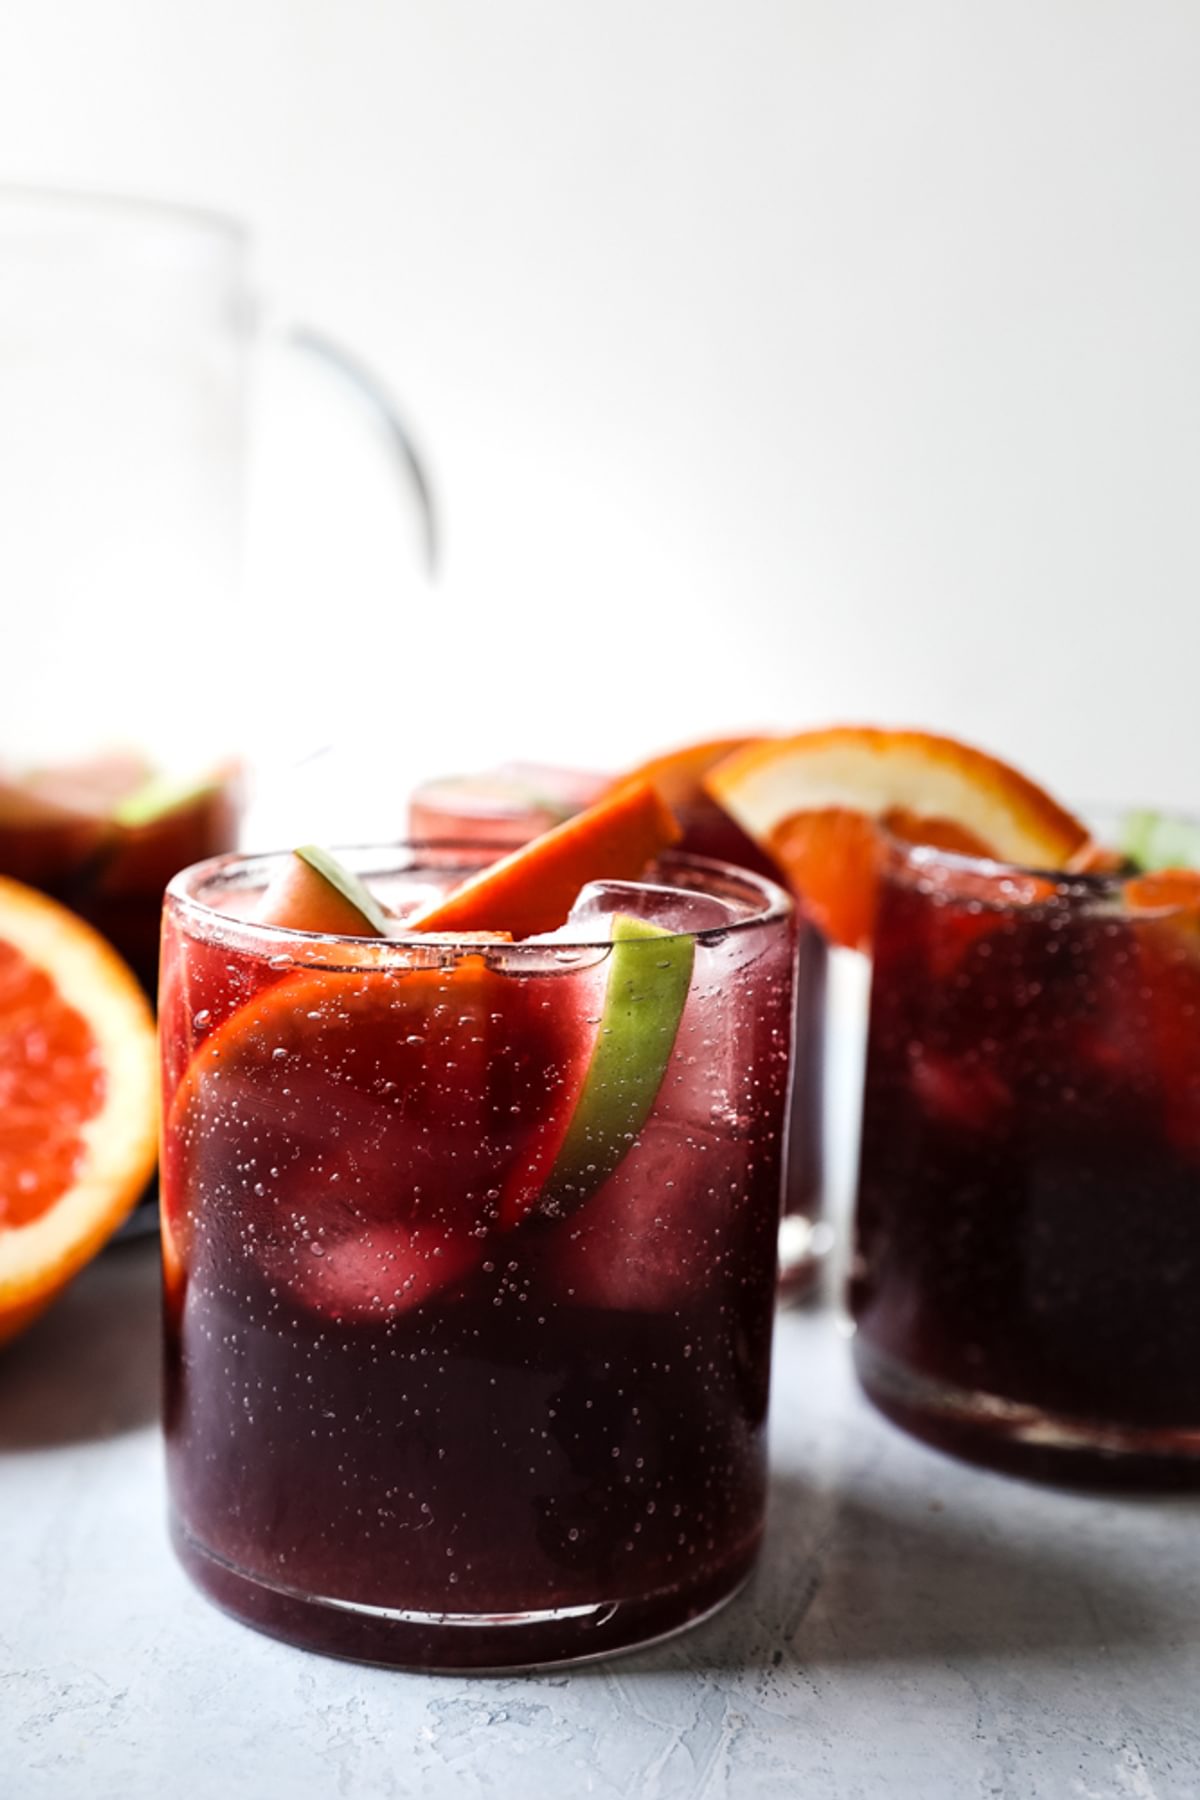 homemade sangria recipe in cups with apples and oranges